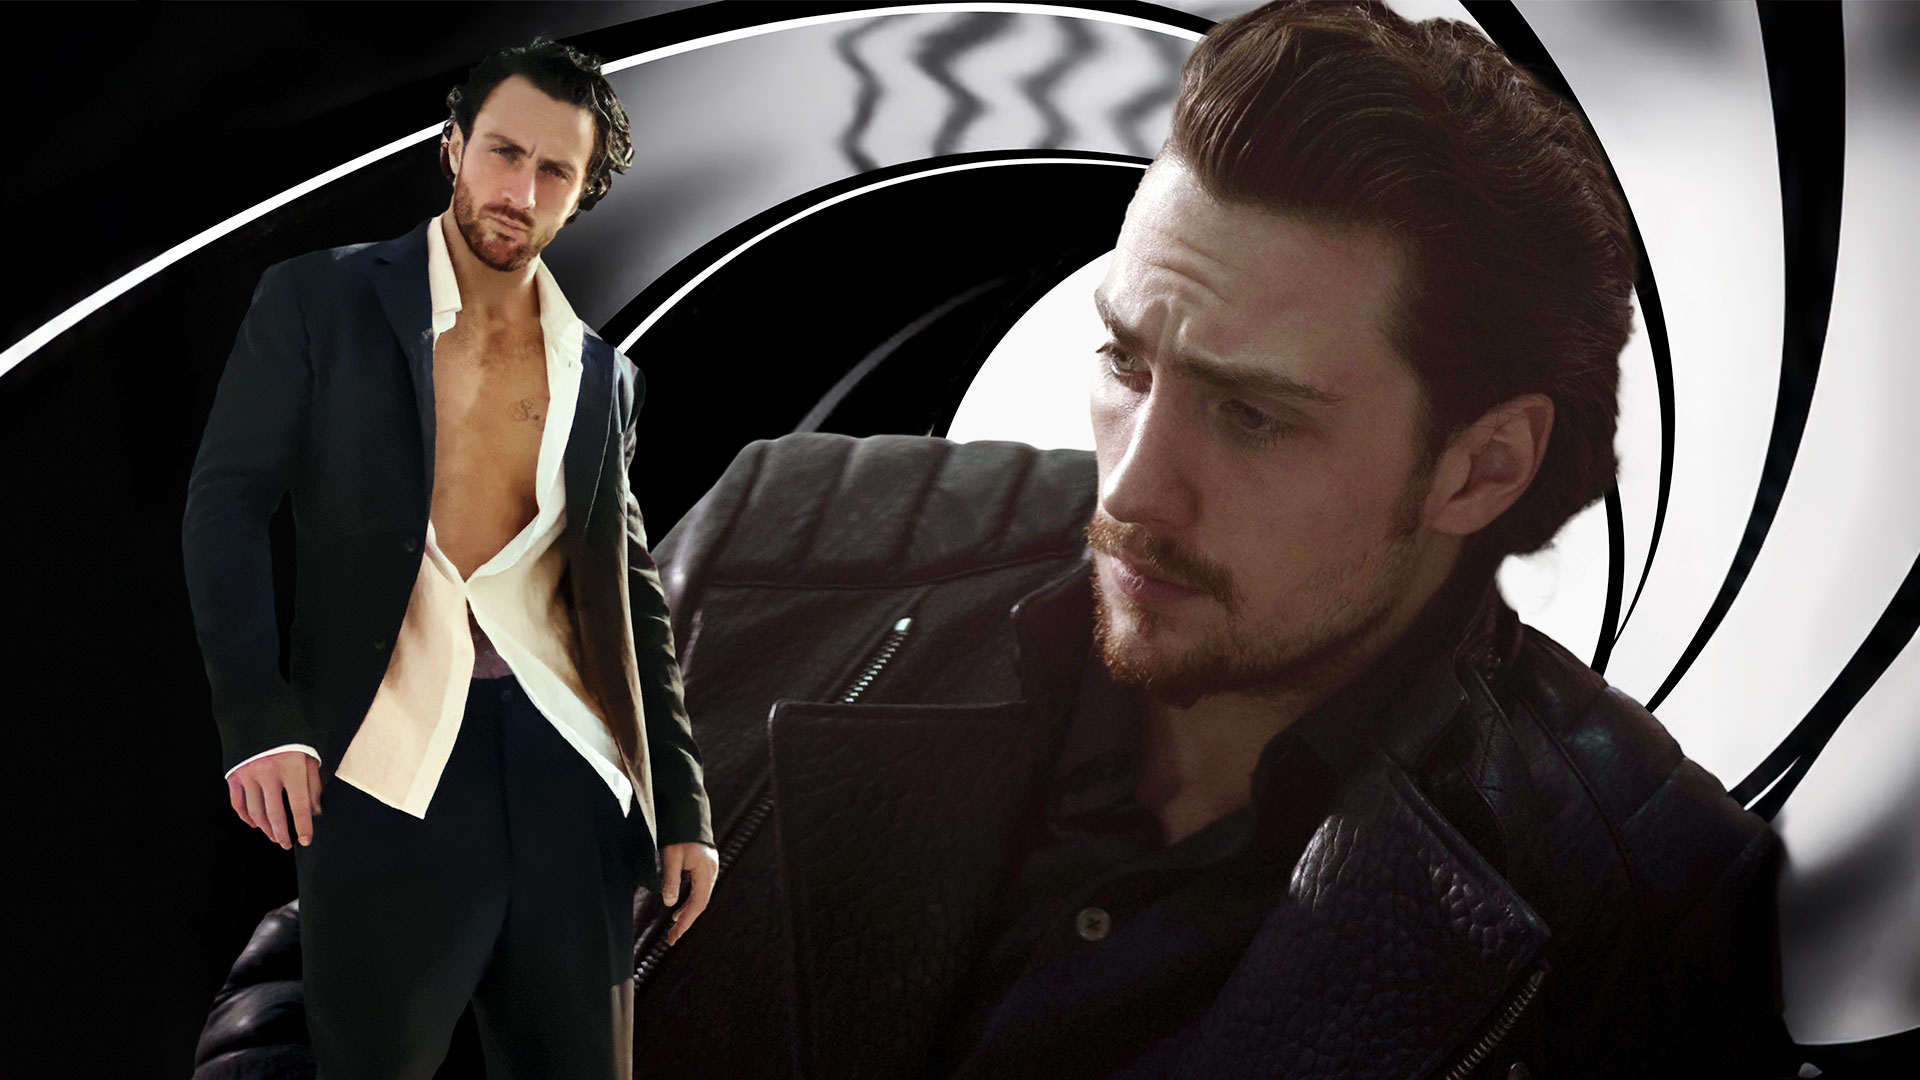 Kraven Power: From Bullet Train to Marvel villain and on to Bond? Aaron Taylor-Johnson remains surprisingly grounded